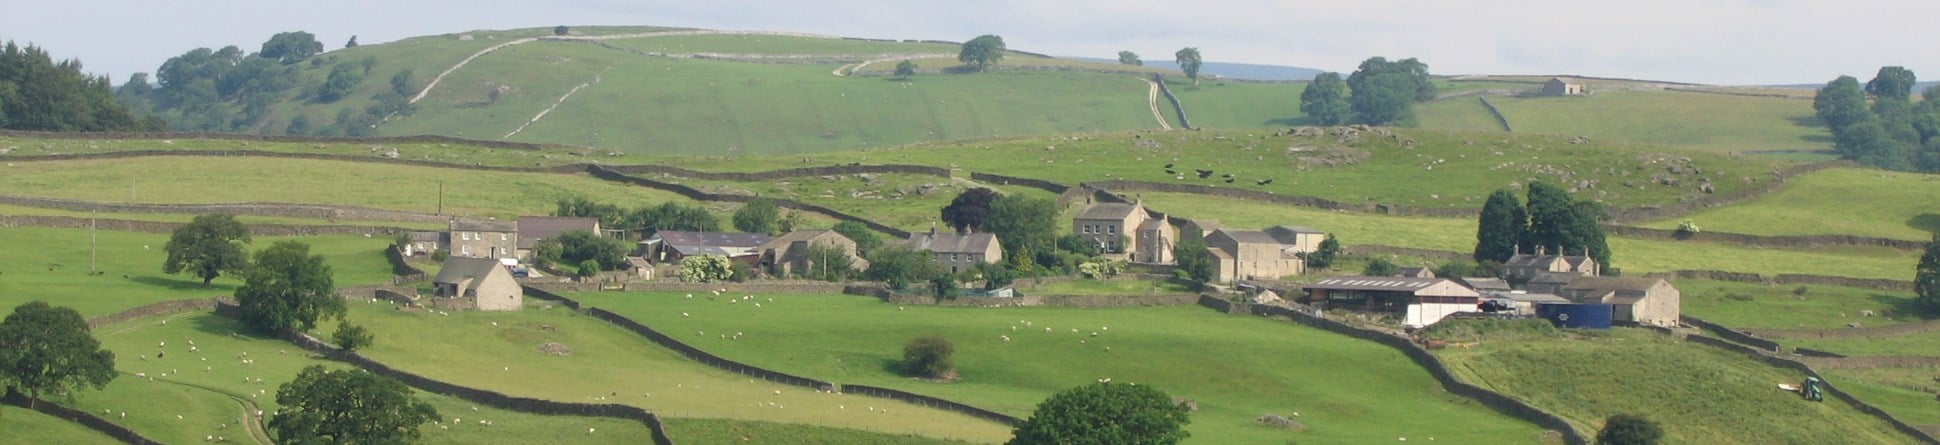 Village of Drebley in Yorkshire Dales National Park viewed from the SE across a river in the foreground.